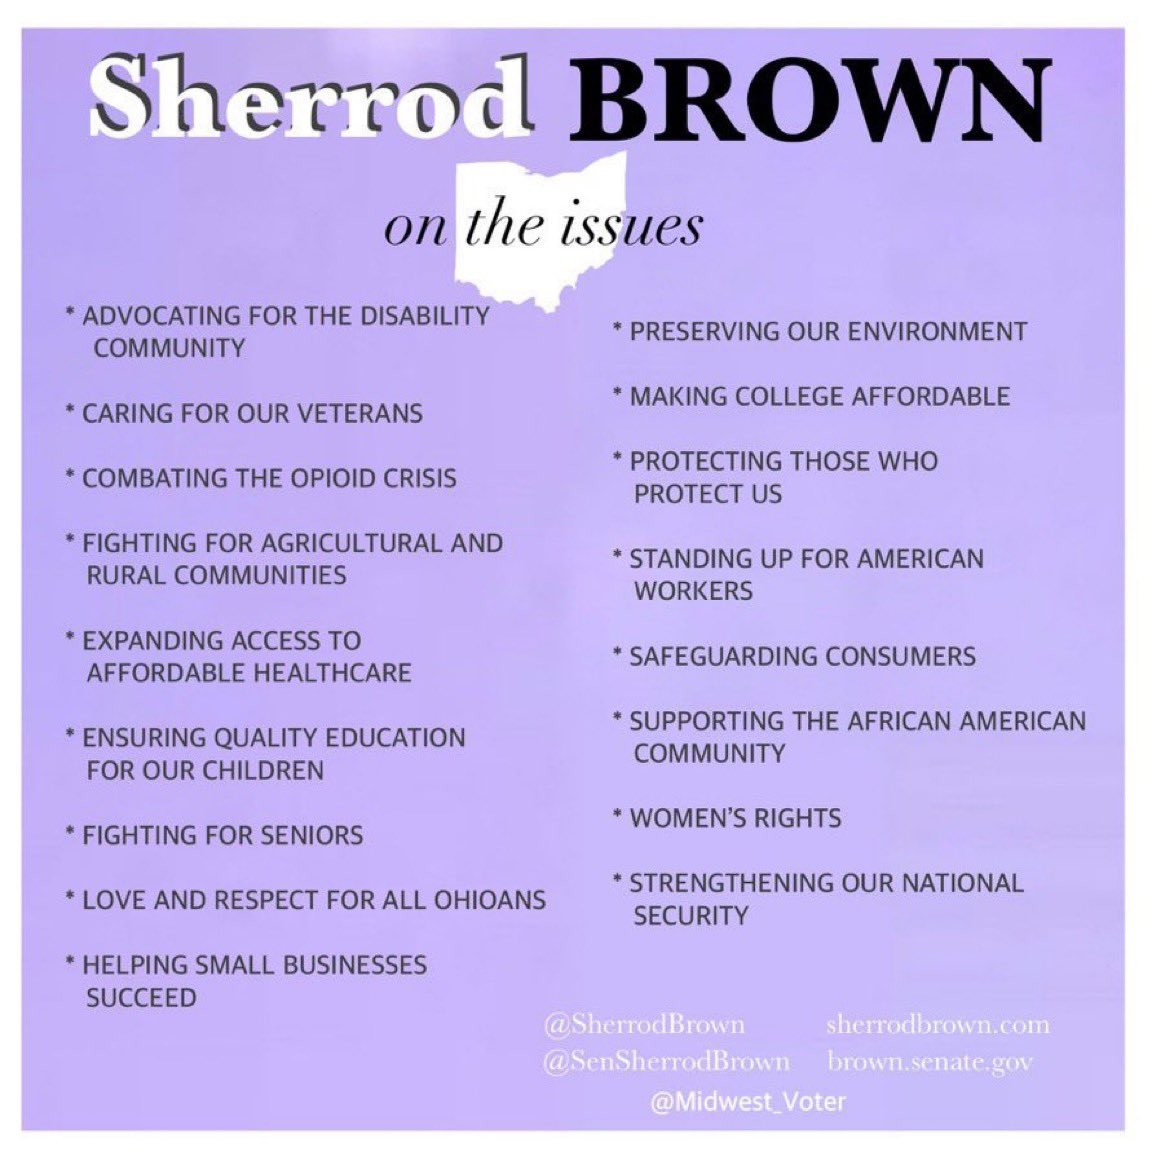 Looking at these issues @SenSherrodBrown champions, why would you not vote for him. Sherrod Brown is a fighter for Ohio and all Americans. He brings honesty and integrity to the Senate. Let’s keep him in his seat. #DemsUnited #Allied4Dems #DemVoice1 #wtpGOTV24